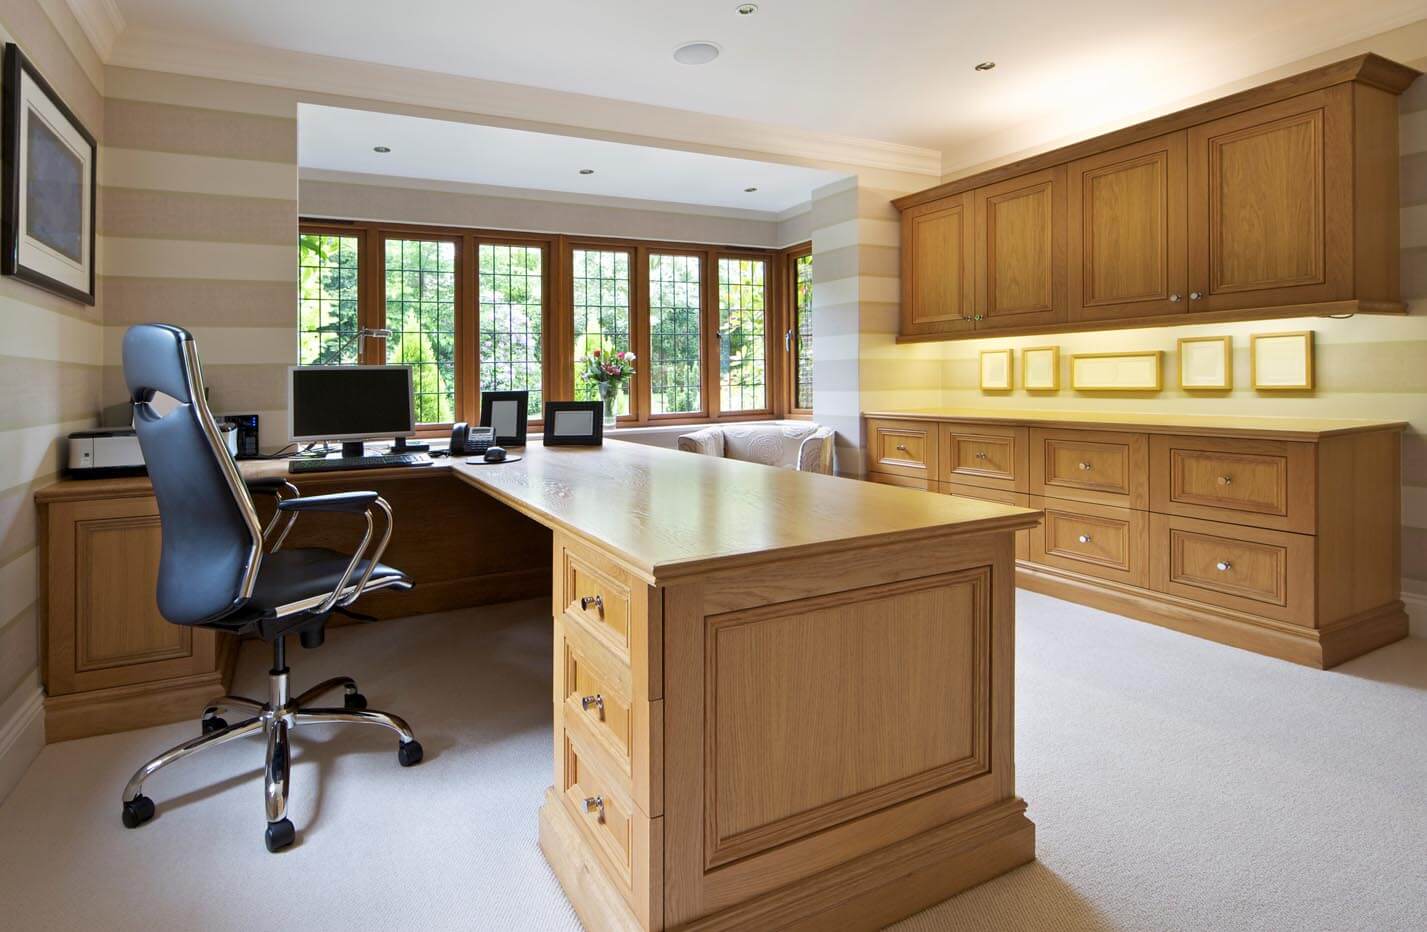 Home Study in Oak with Filing Cabinets and Storage